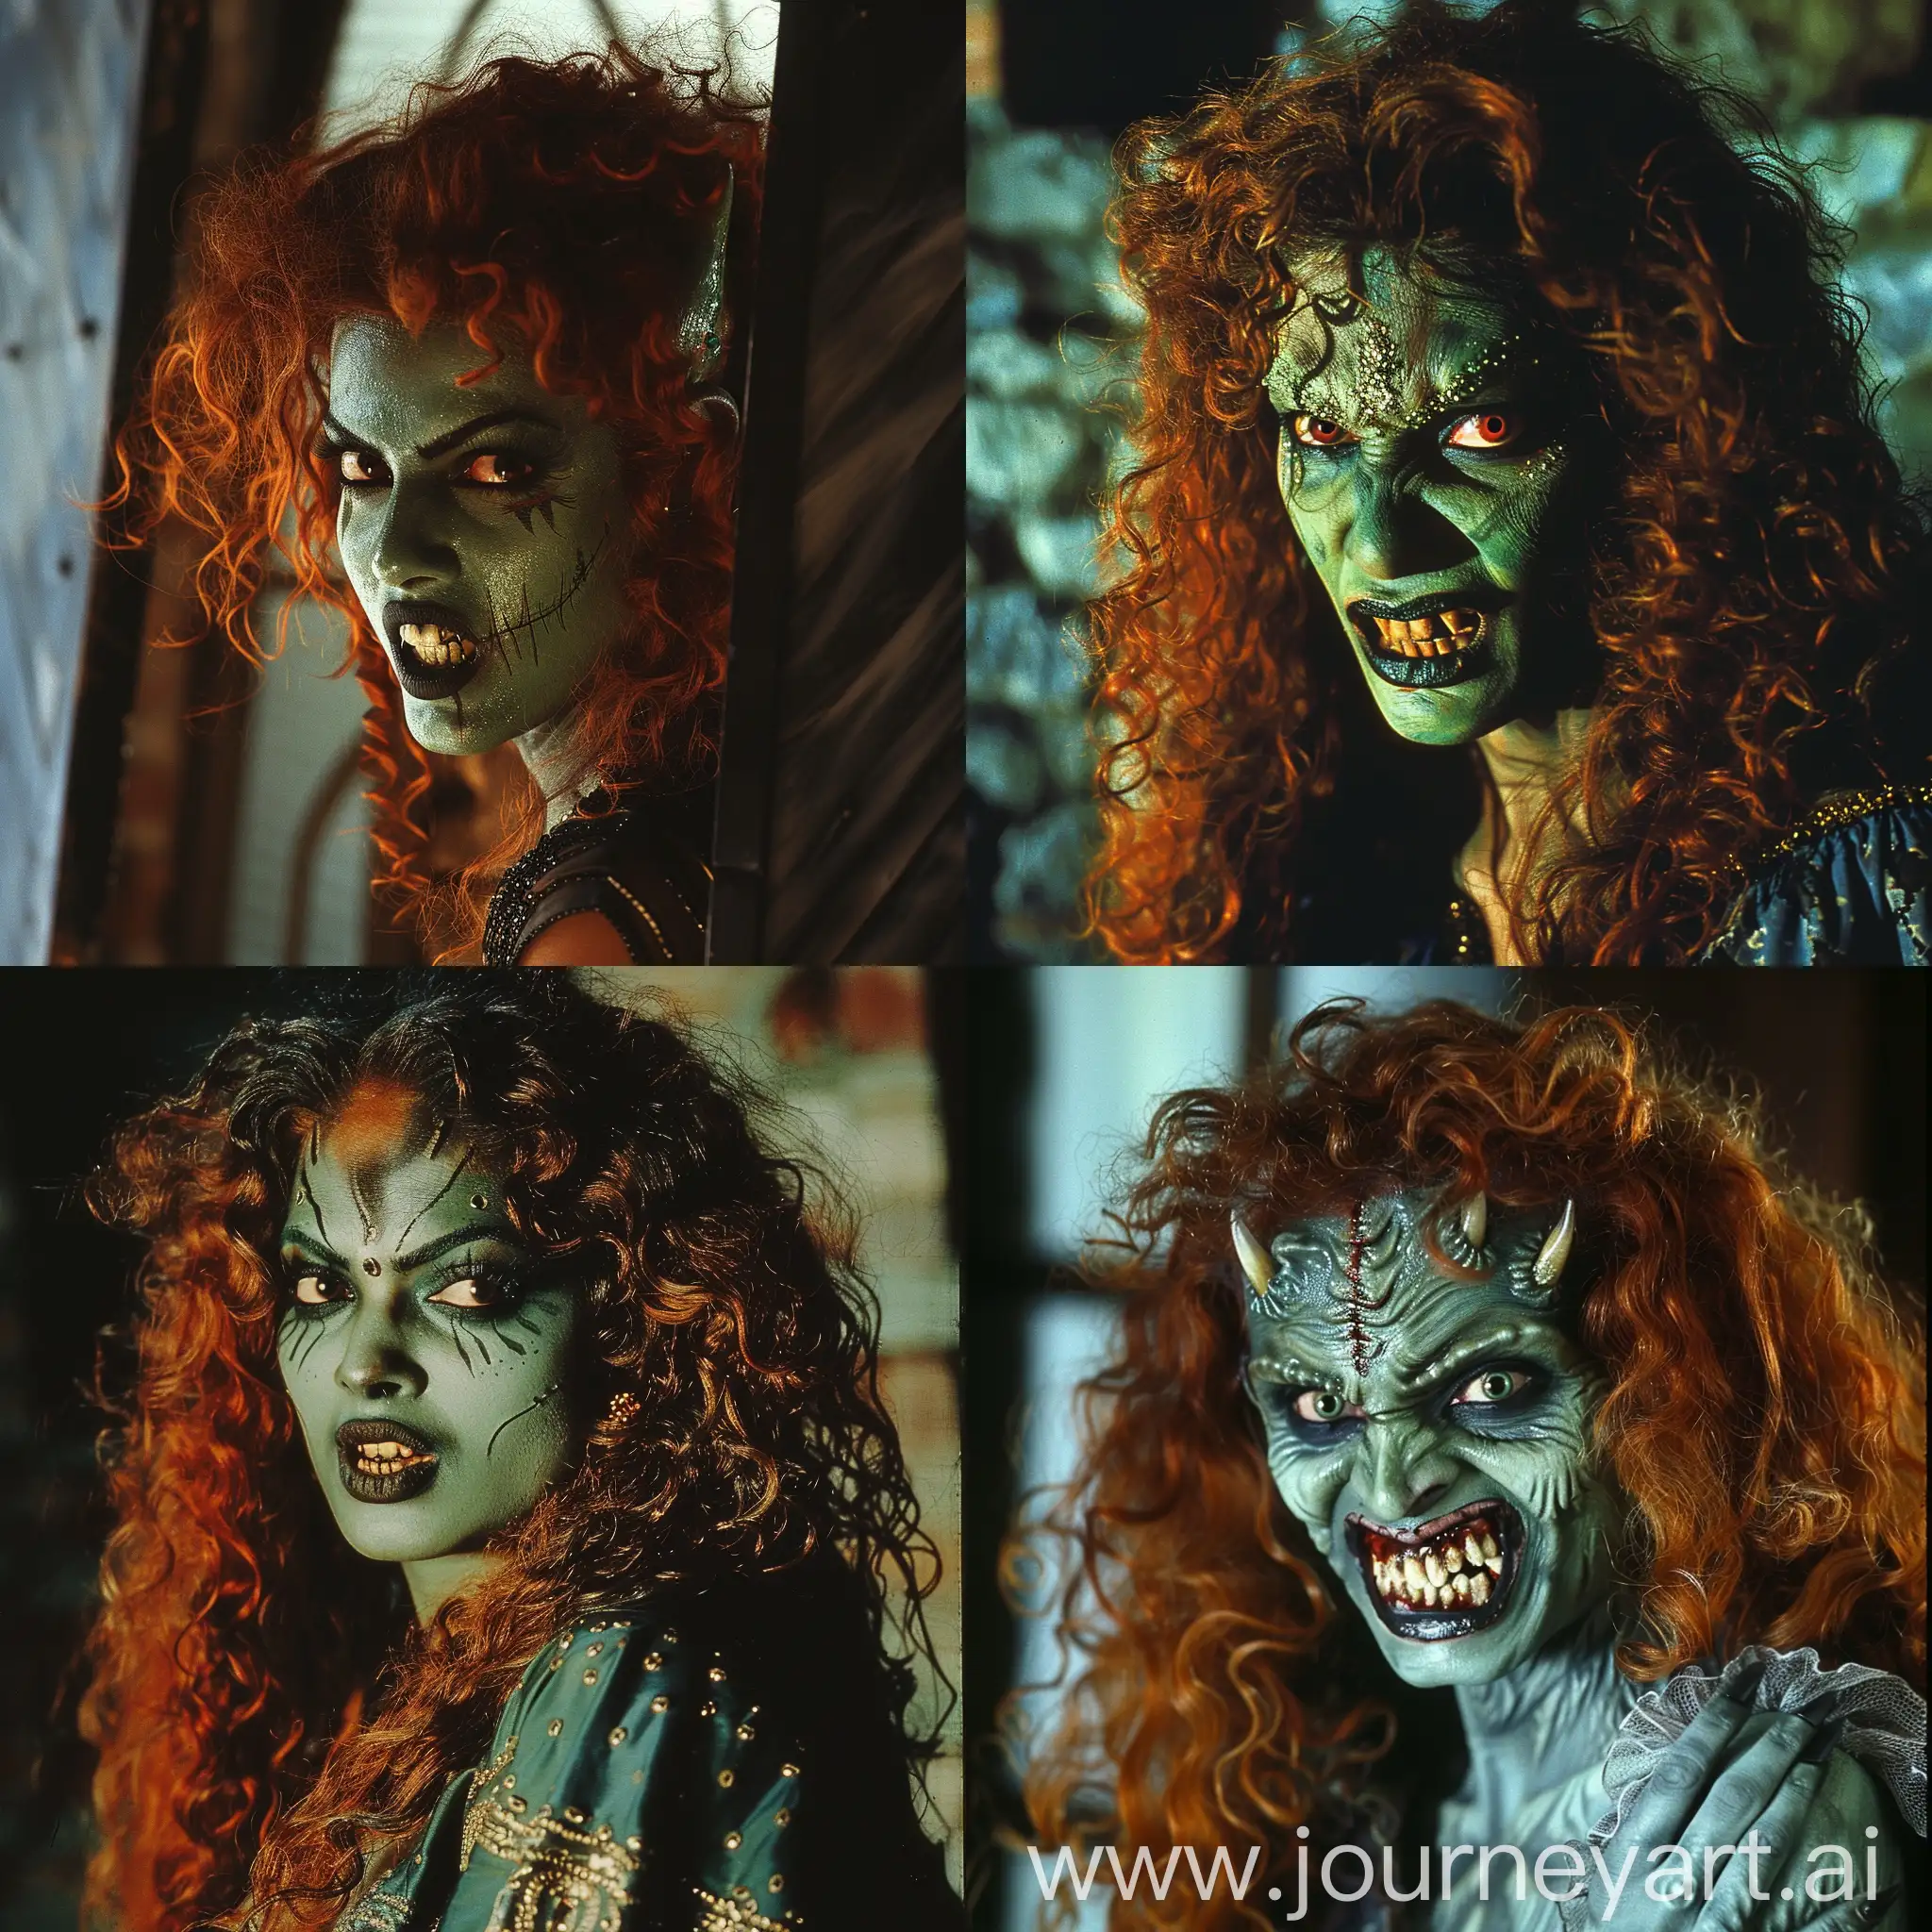 Malevolent-Malayali-Demon-with-Enlarged-Cheekbones-and-Fangs-1980s-Horror-Movie-Scene